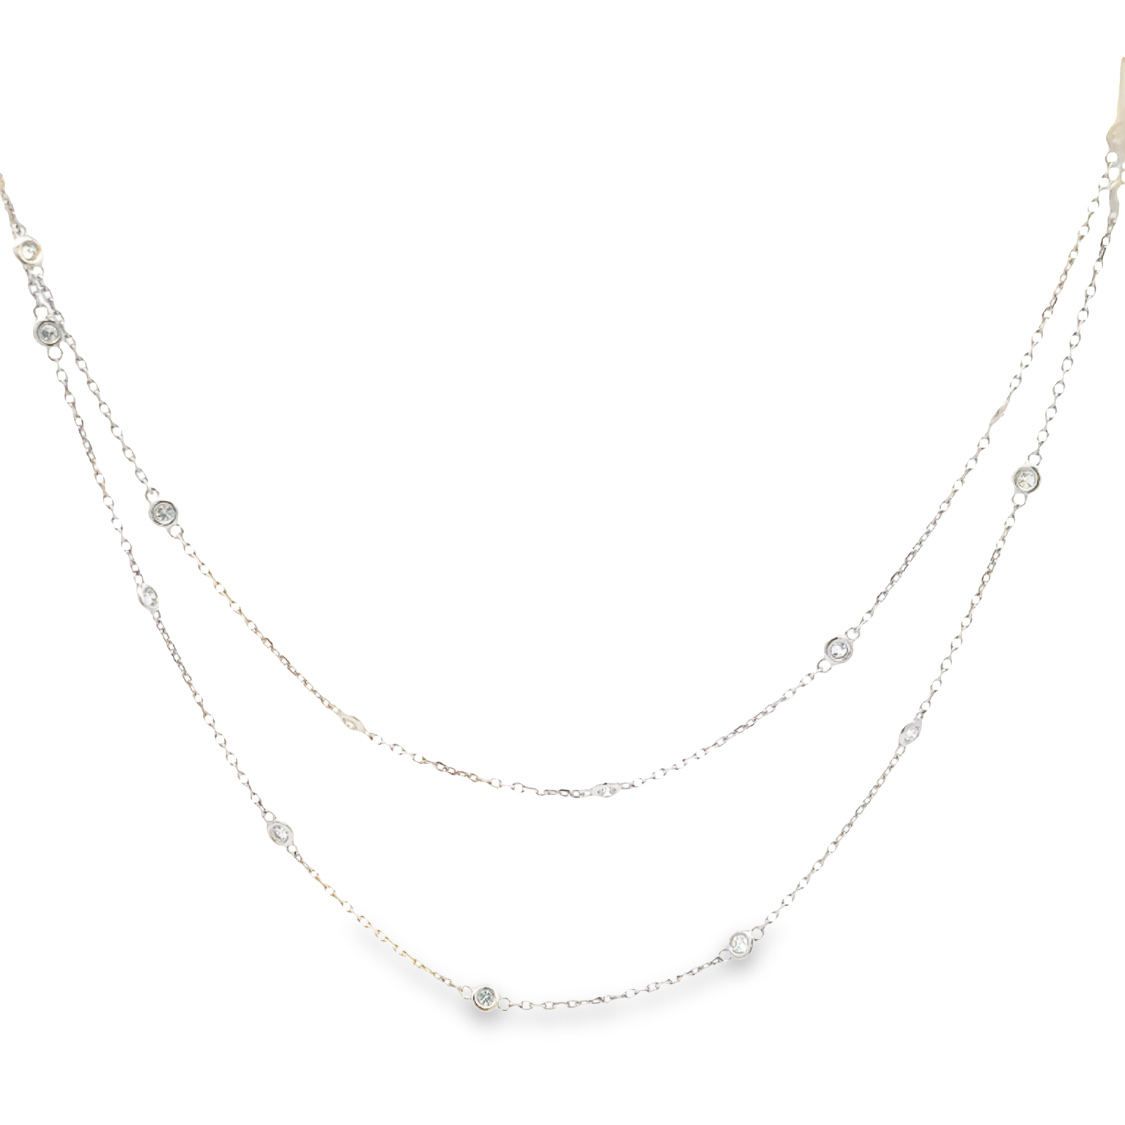 14K White Gold Diamonds by the Yard Necklace 36